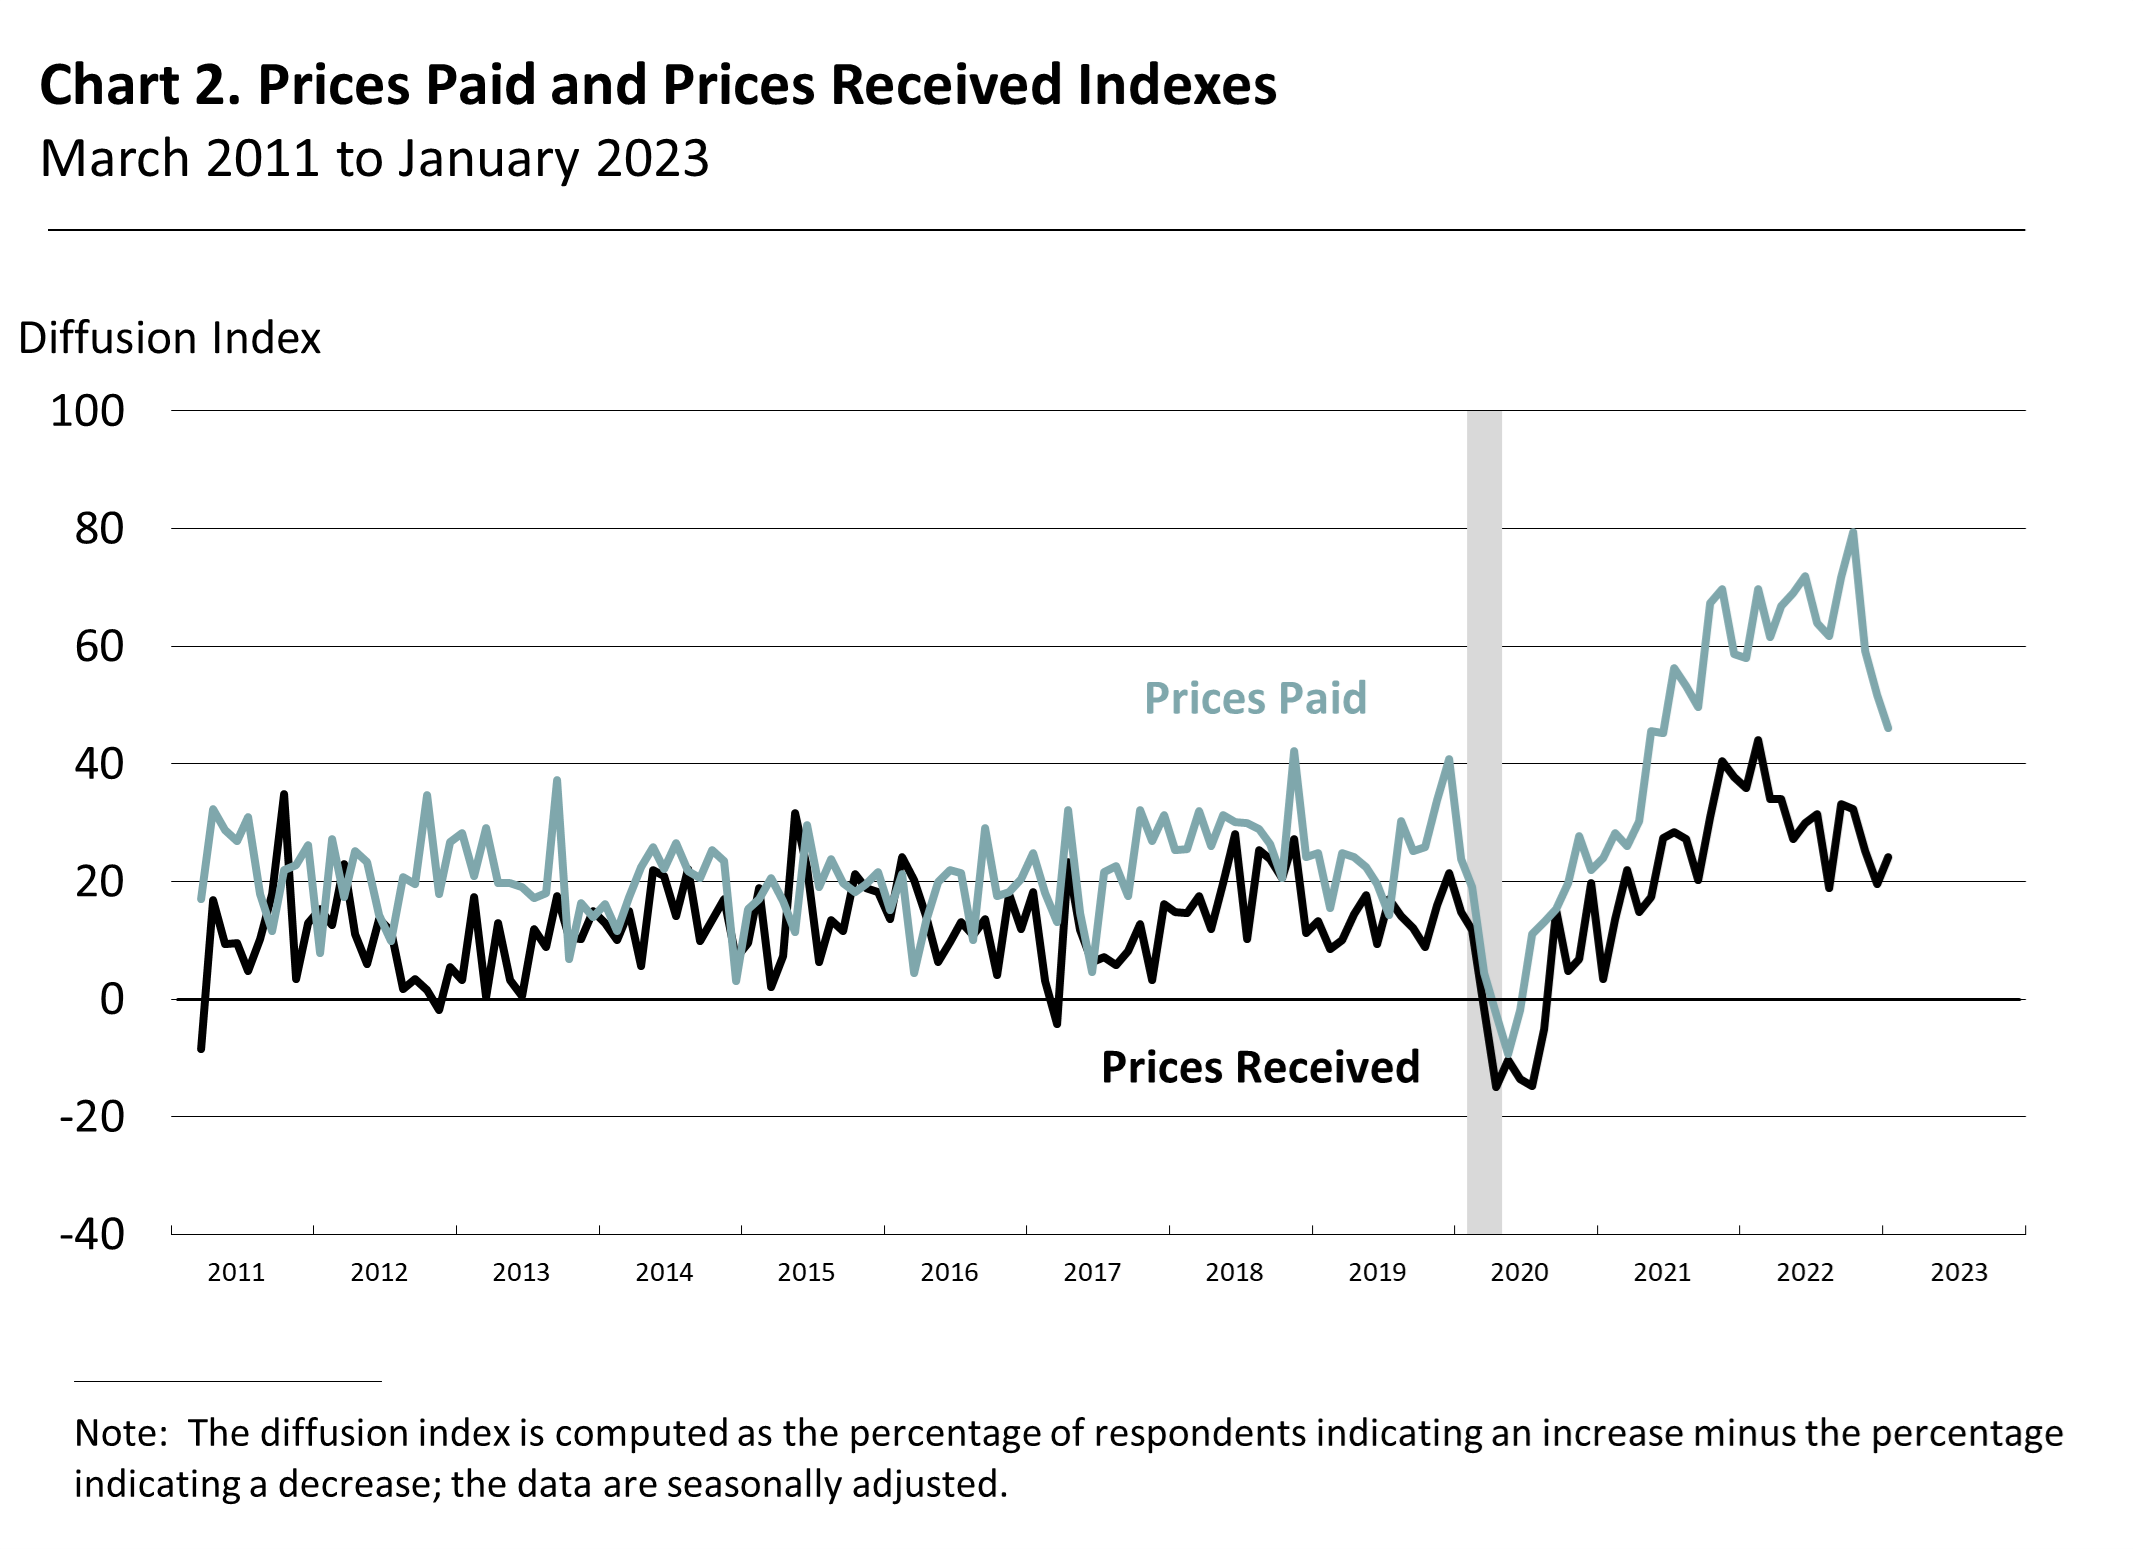 Chart 2. Current Prices Paid and Prices Received Indexes